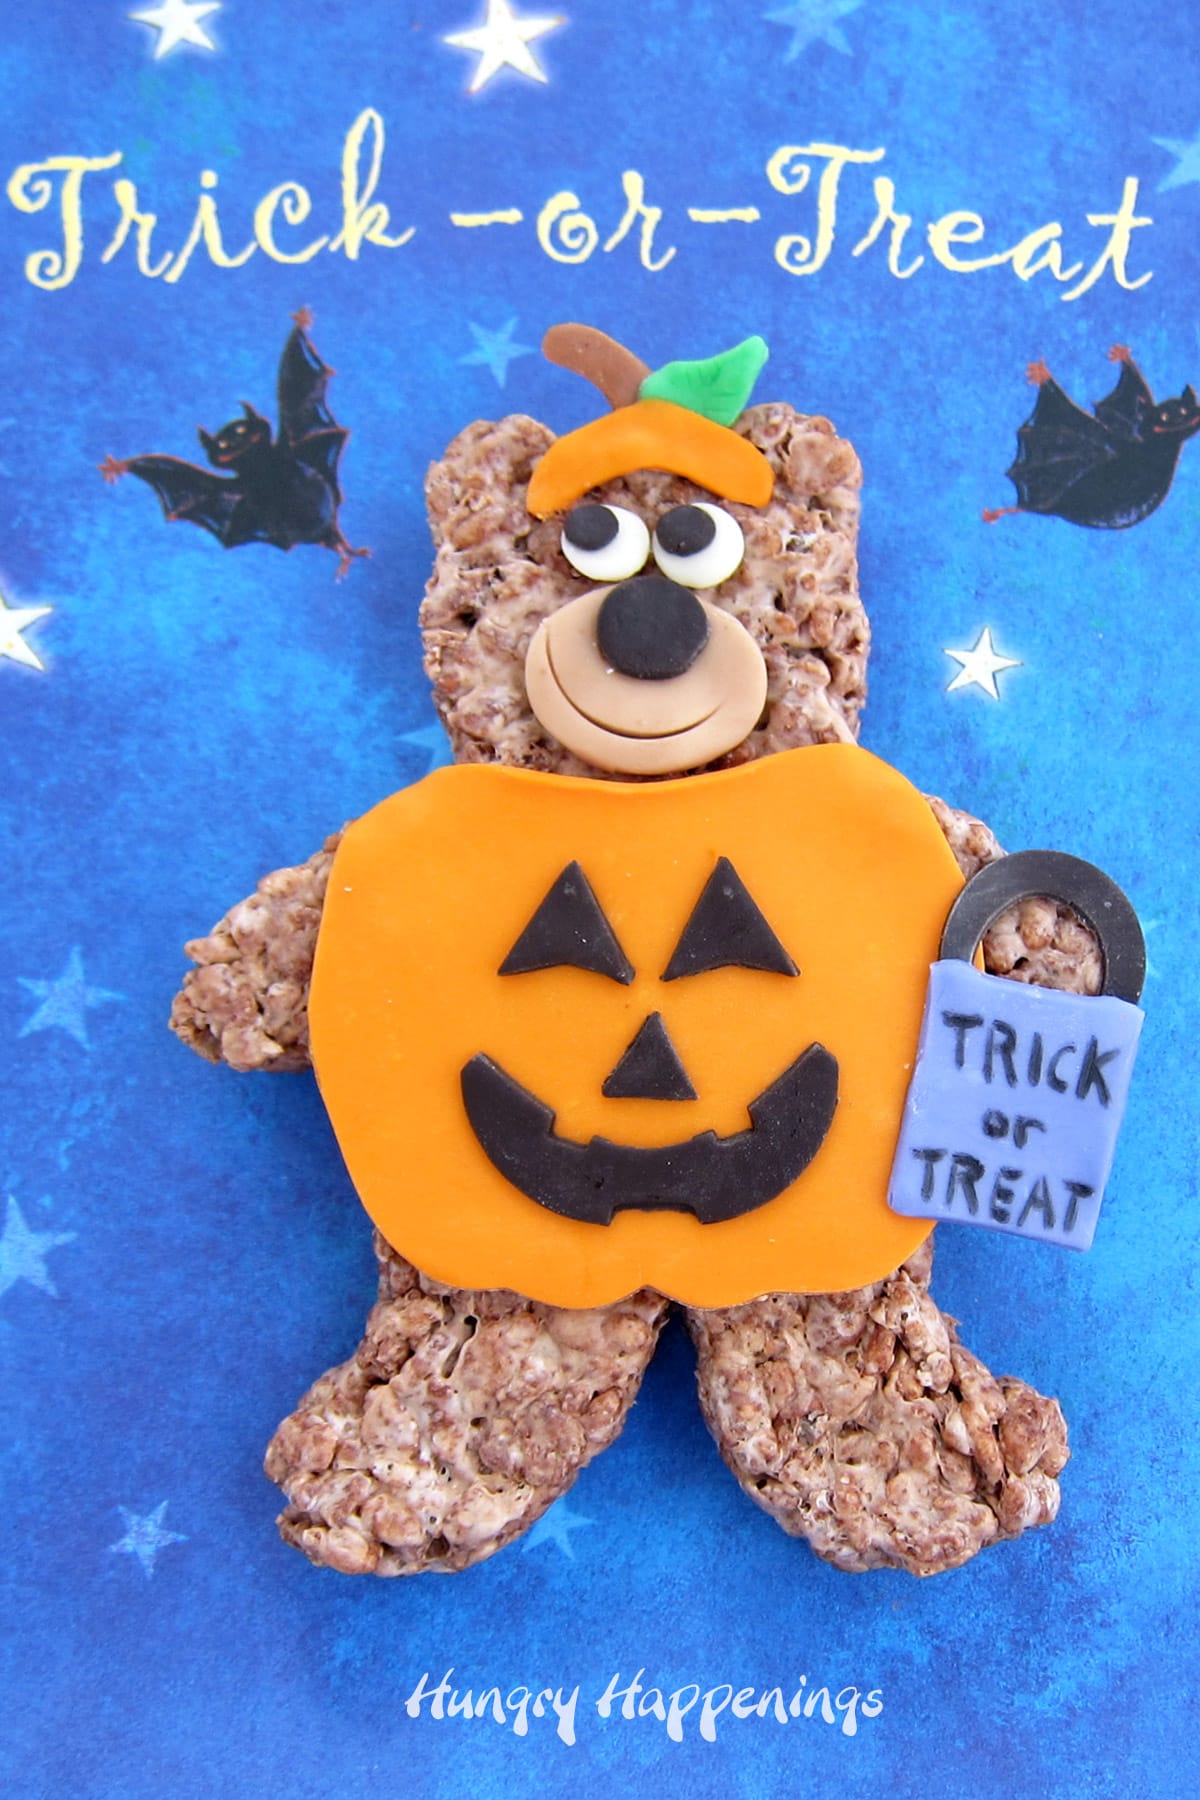 Halloween rice krispie treats bear in a pumpkin costume made out of modeling chocolate.